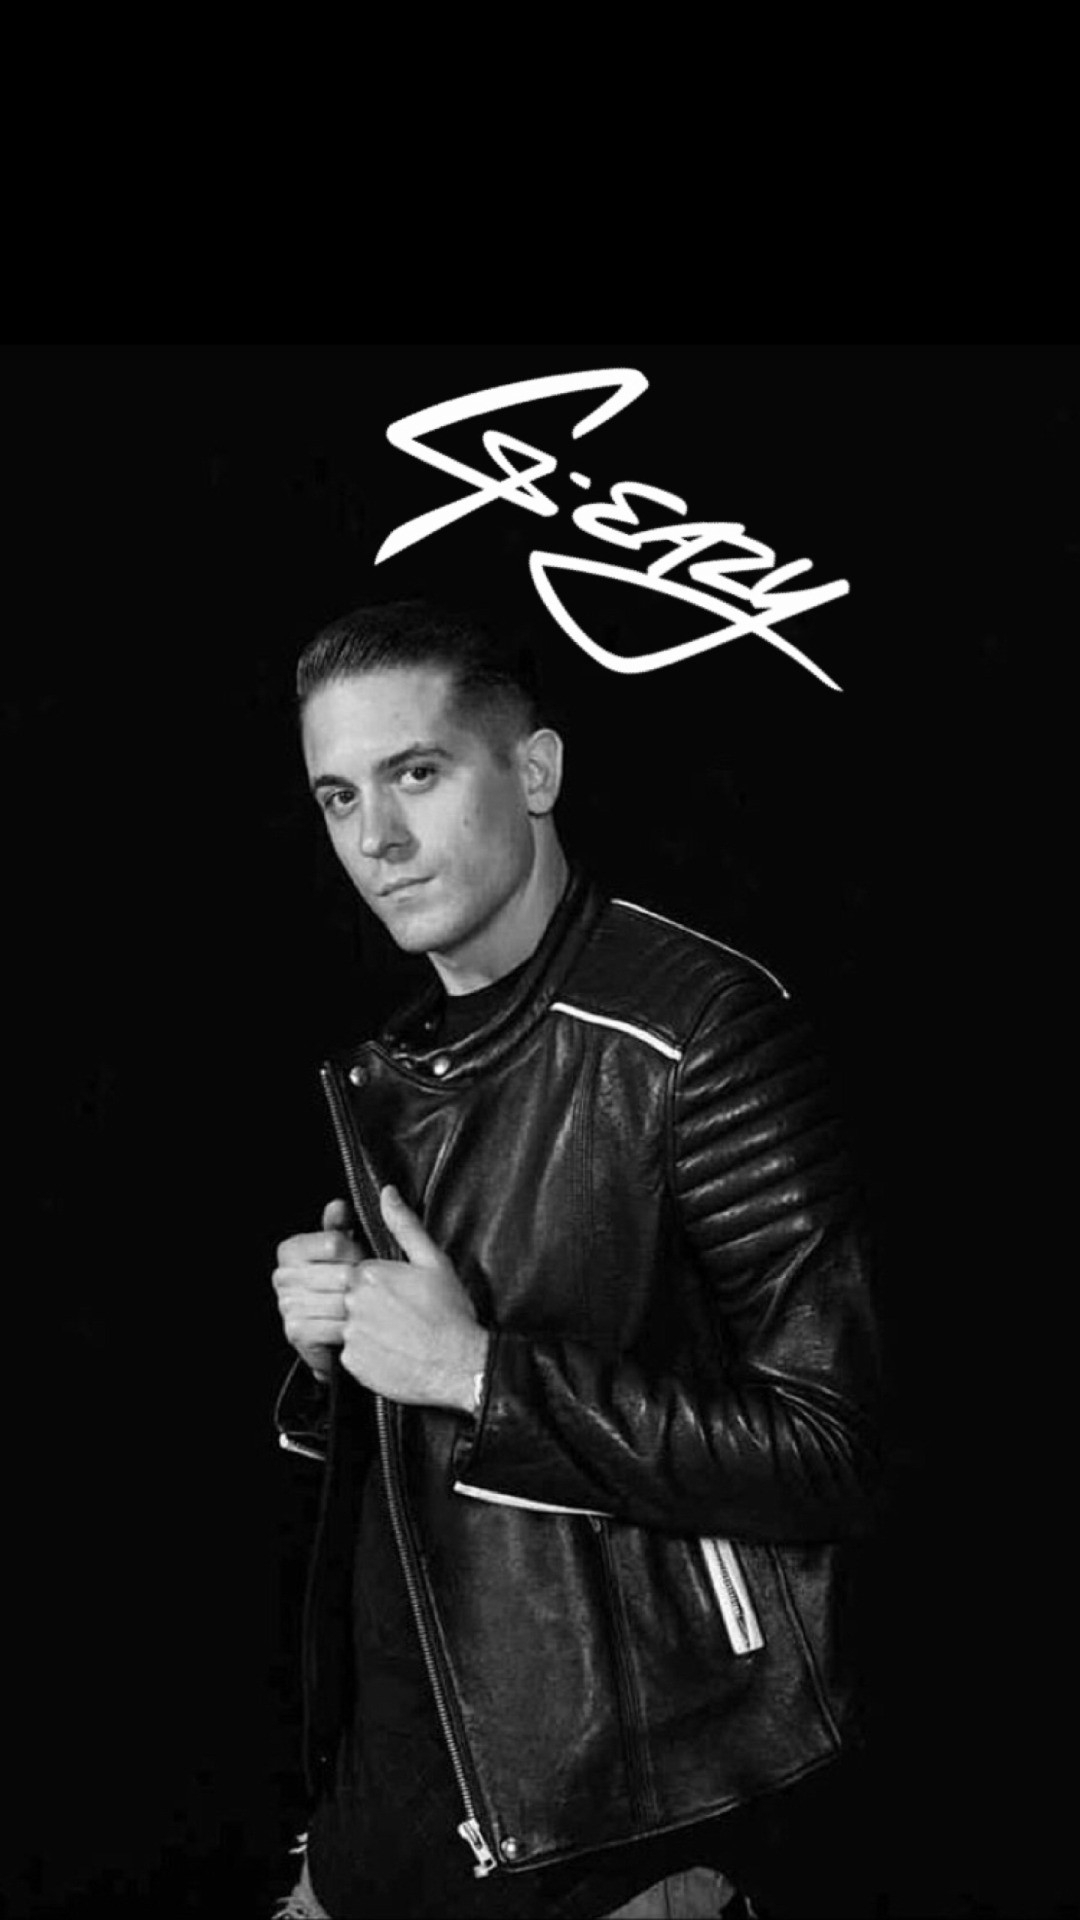 g eazy iphone wallpaper (66+ images)